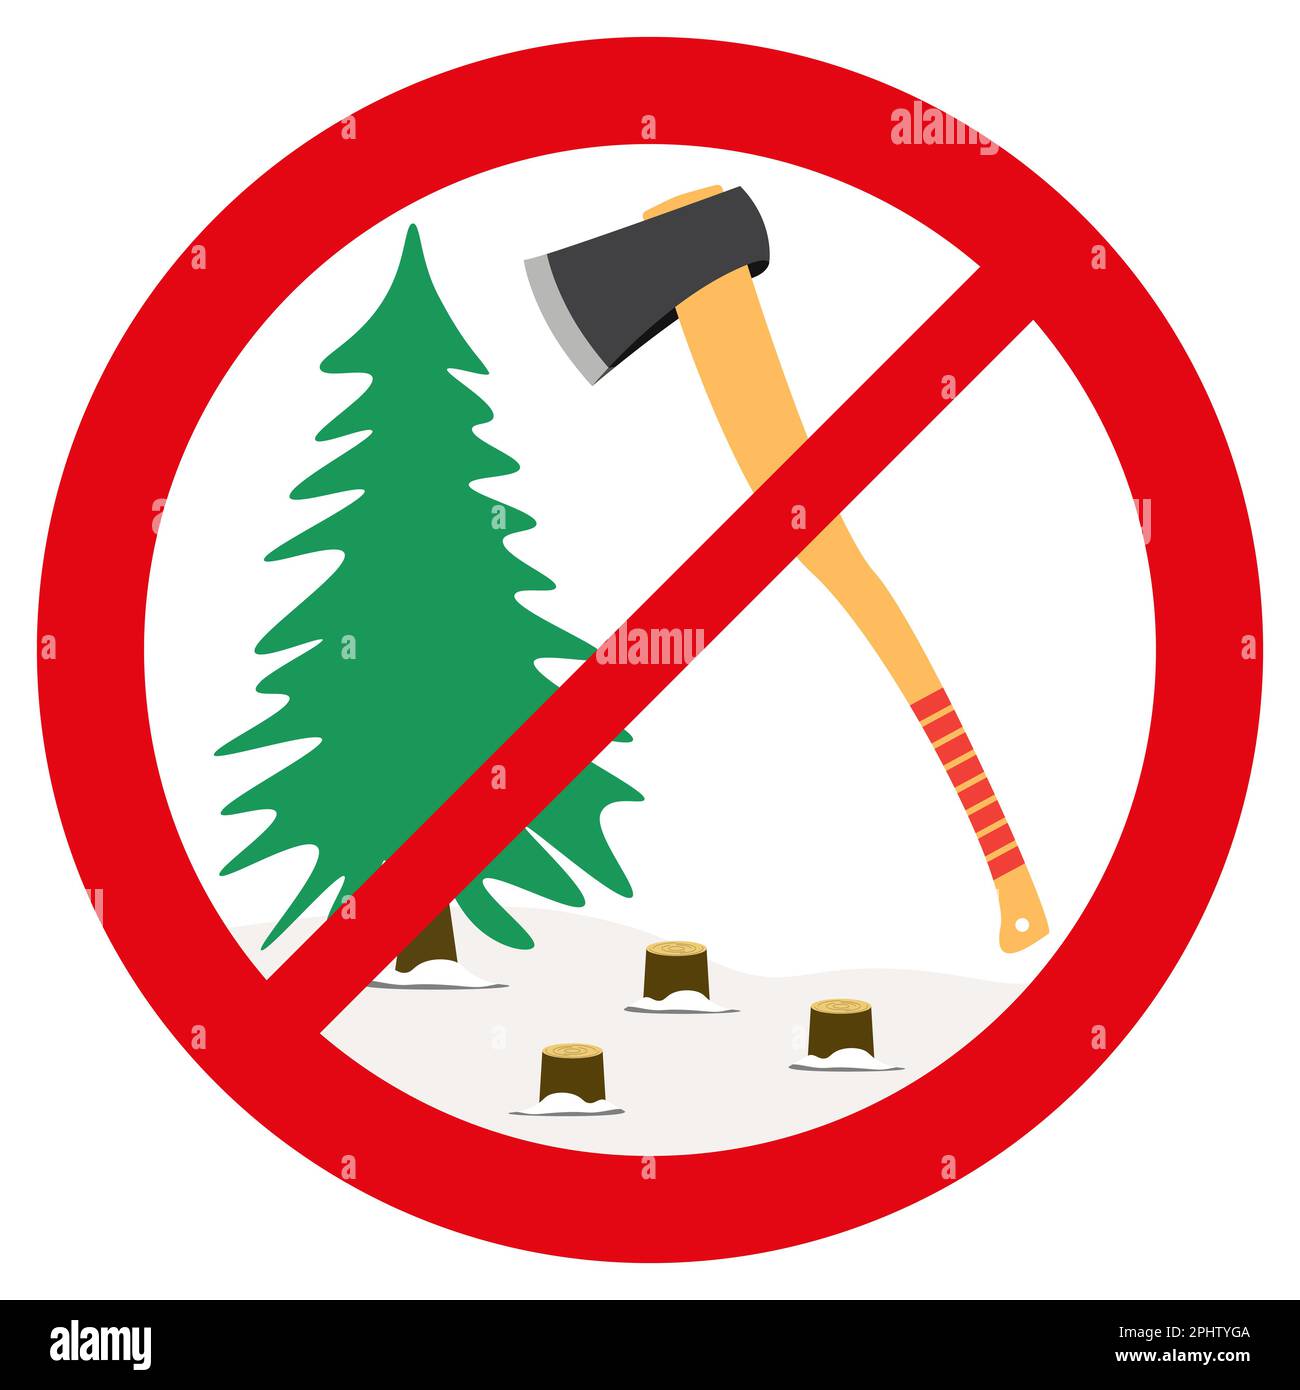 Sign in cartoon style. Stop cutting down live trees for Christmas. Christmas tree and Axe. Colorful vector illustration on a white background. Stock Vector